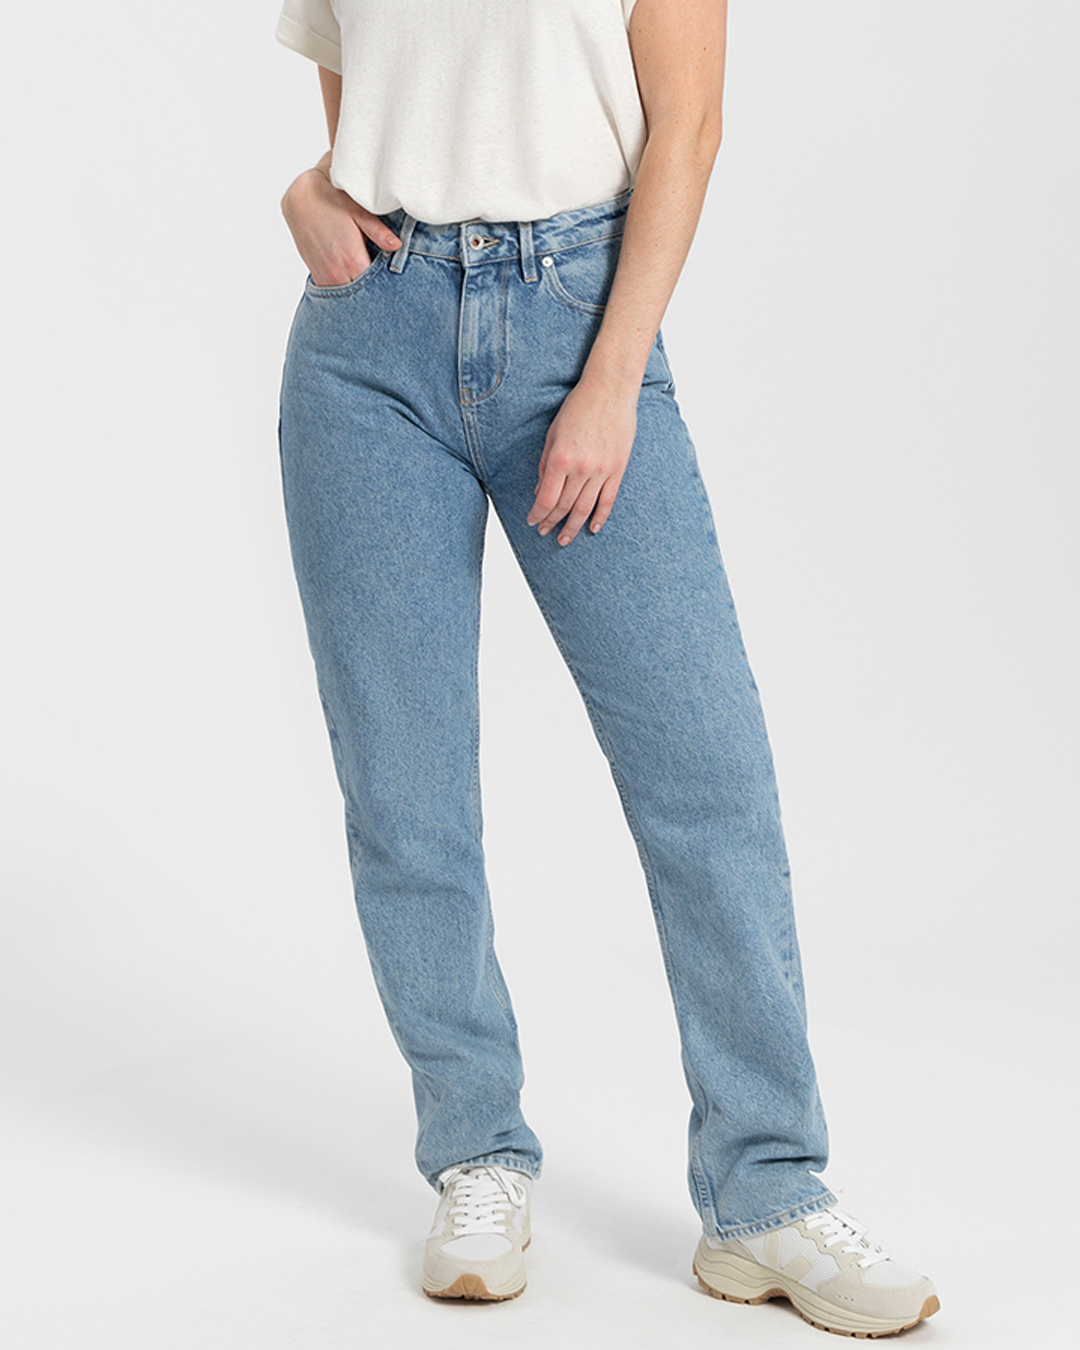 Jeans1.png